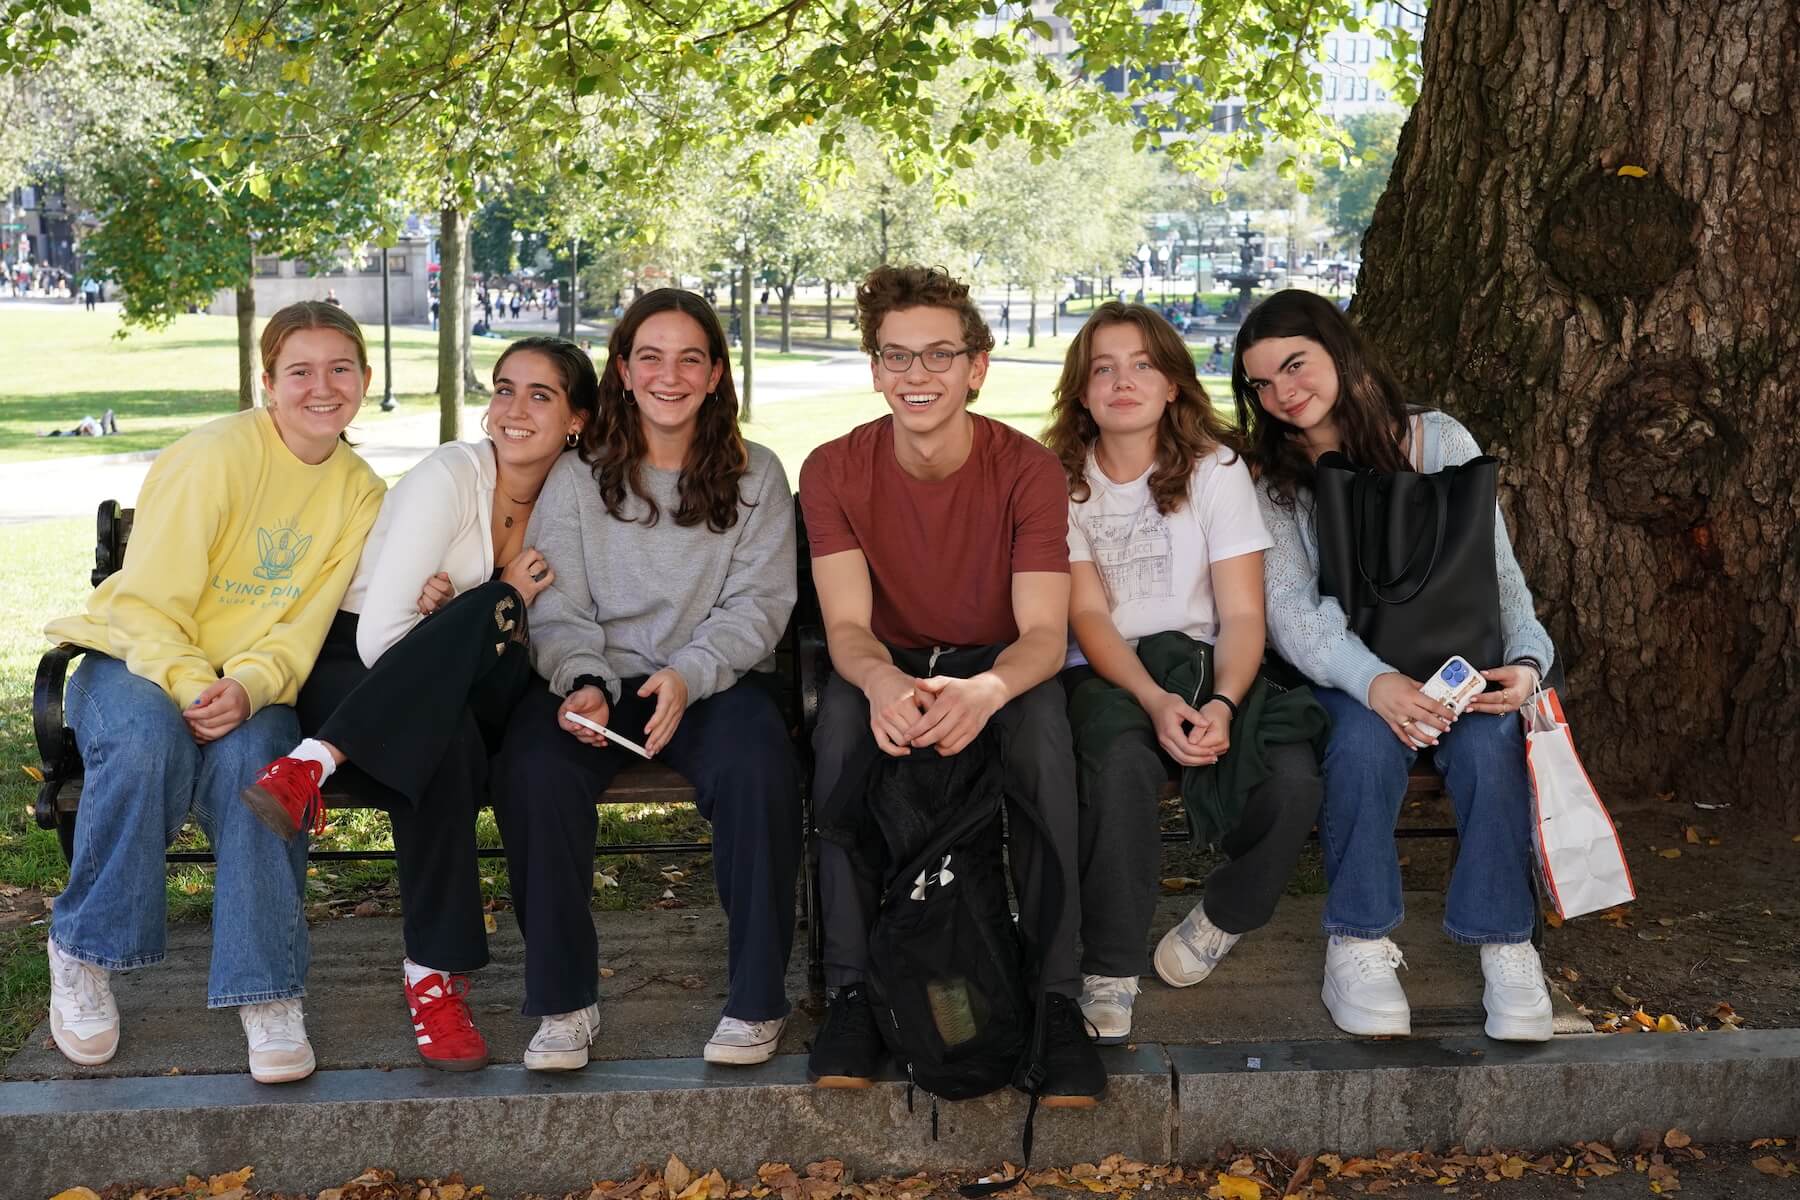 Ethical Culture Fieldston School_Feel Good Photos_Upper School students sitting in a park during a Boston field trip